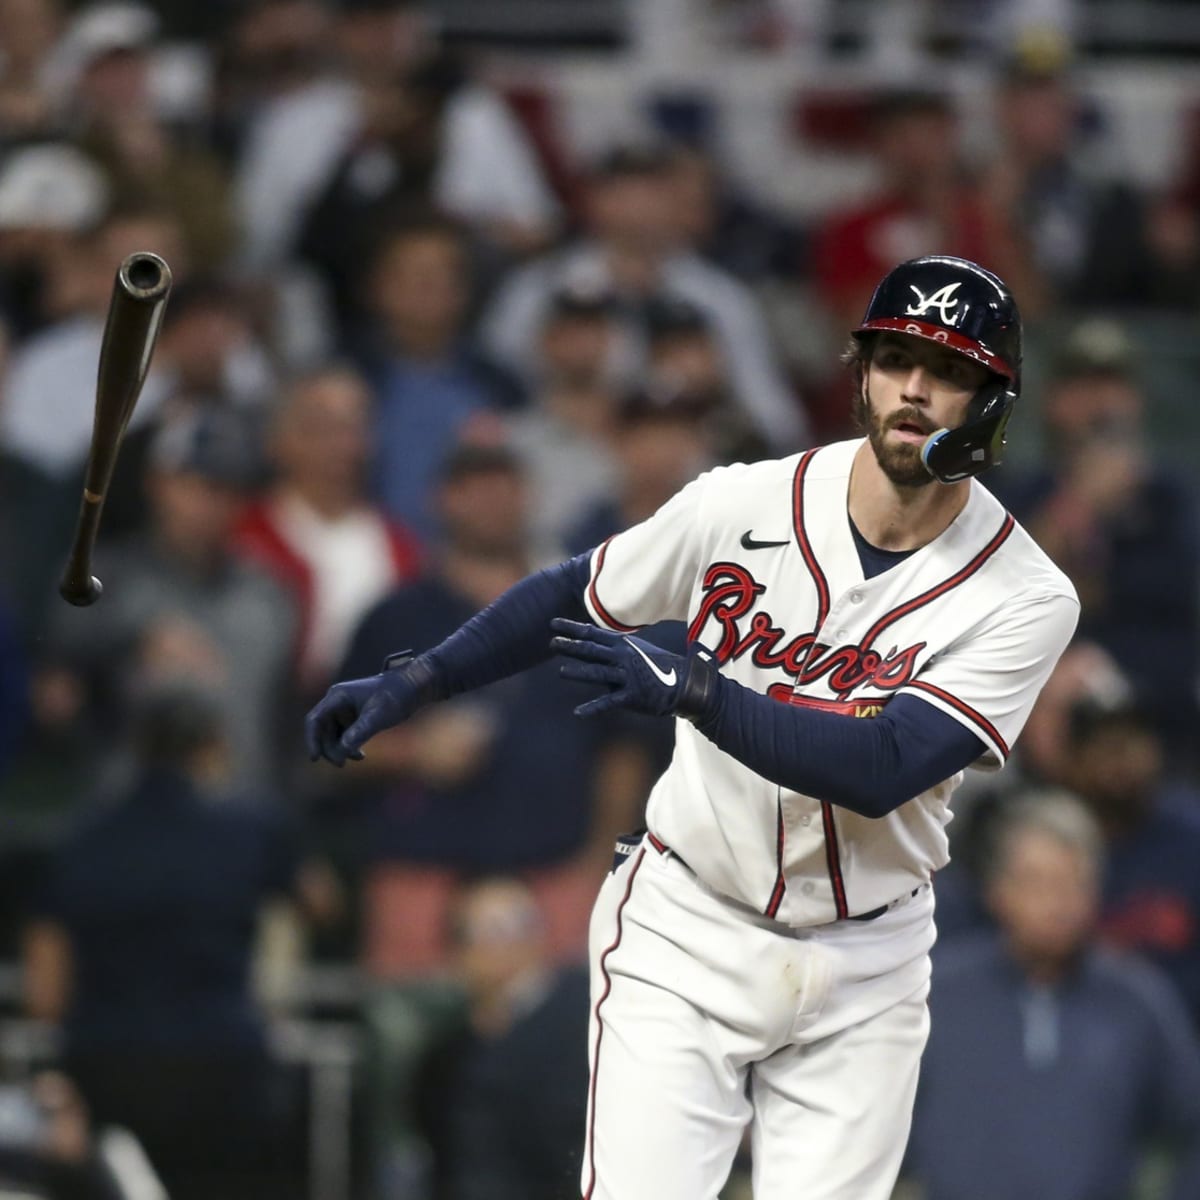 Cubs Rumors: Red Sox showing serious interest in Dansby Swanson